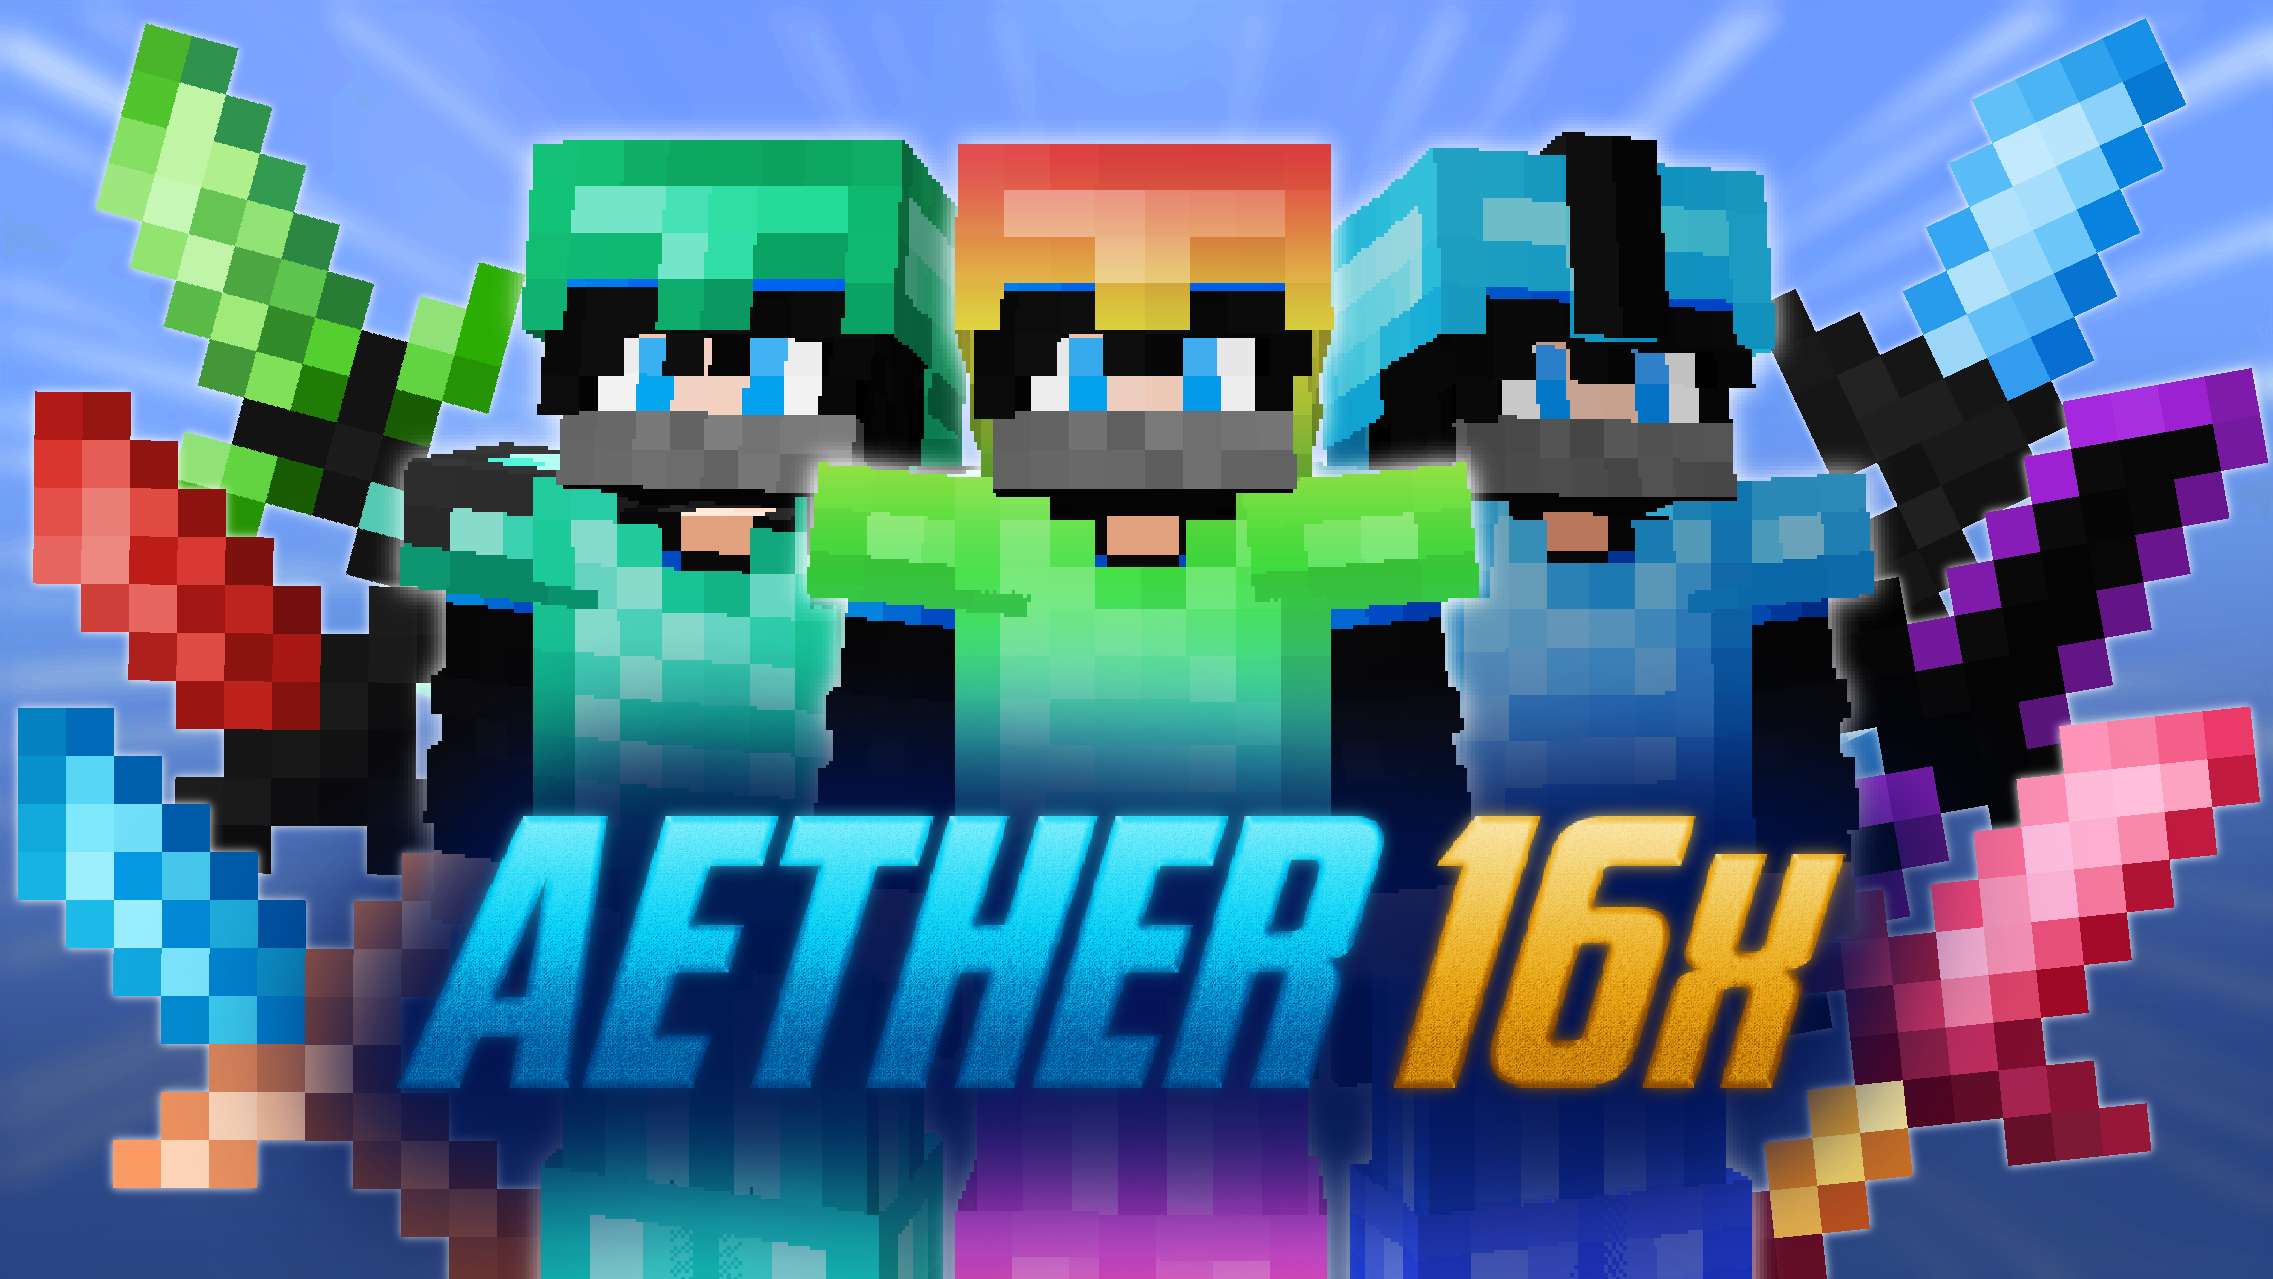 Aether 16x [NotroDan] 16x by Mqryo on PvPRP